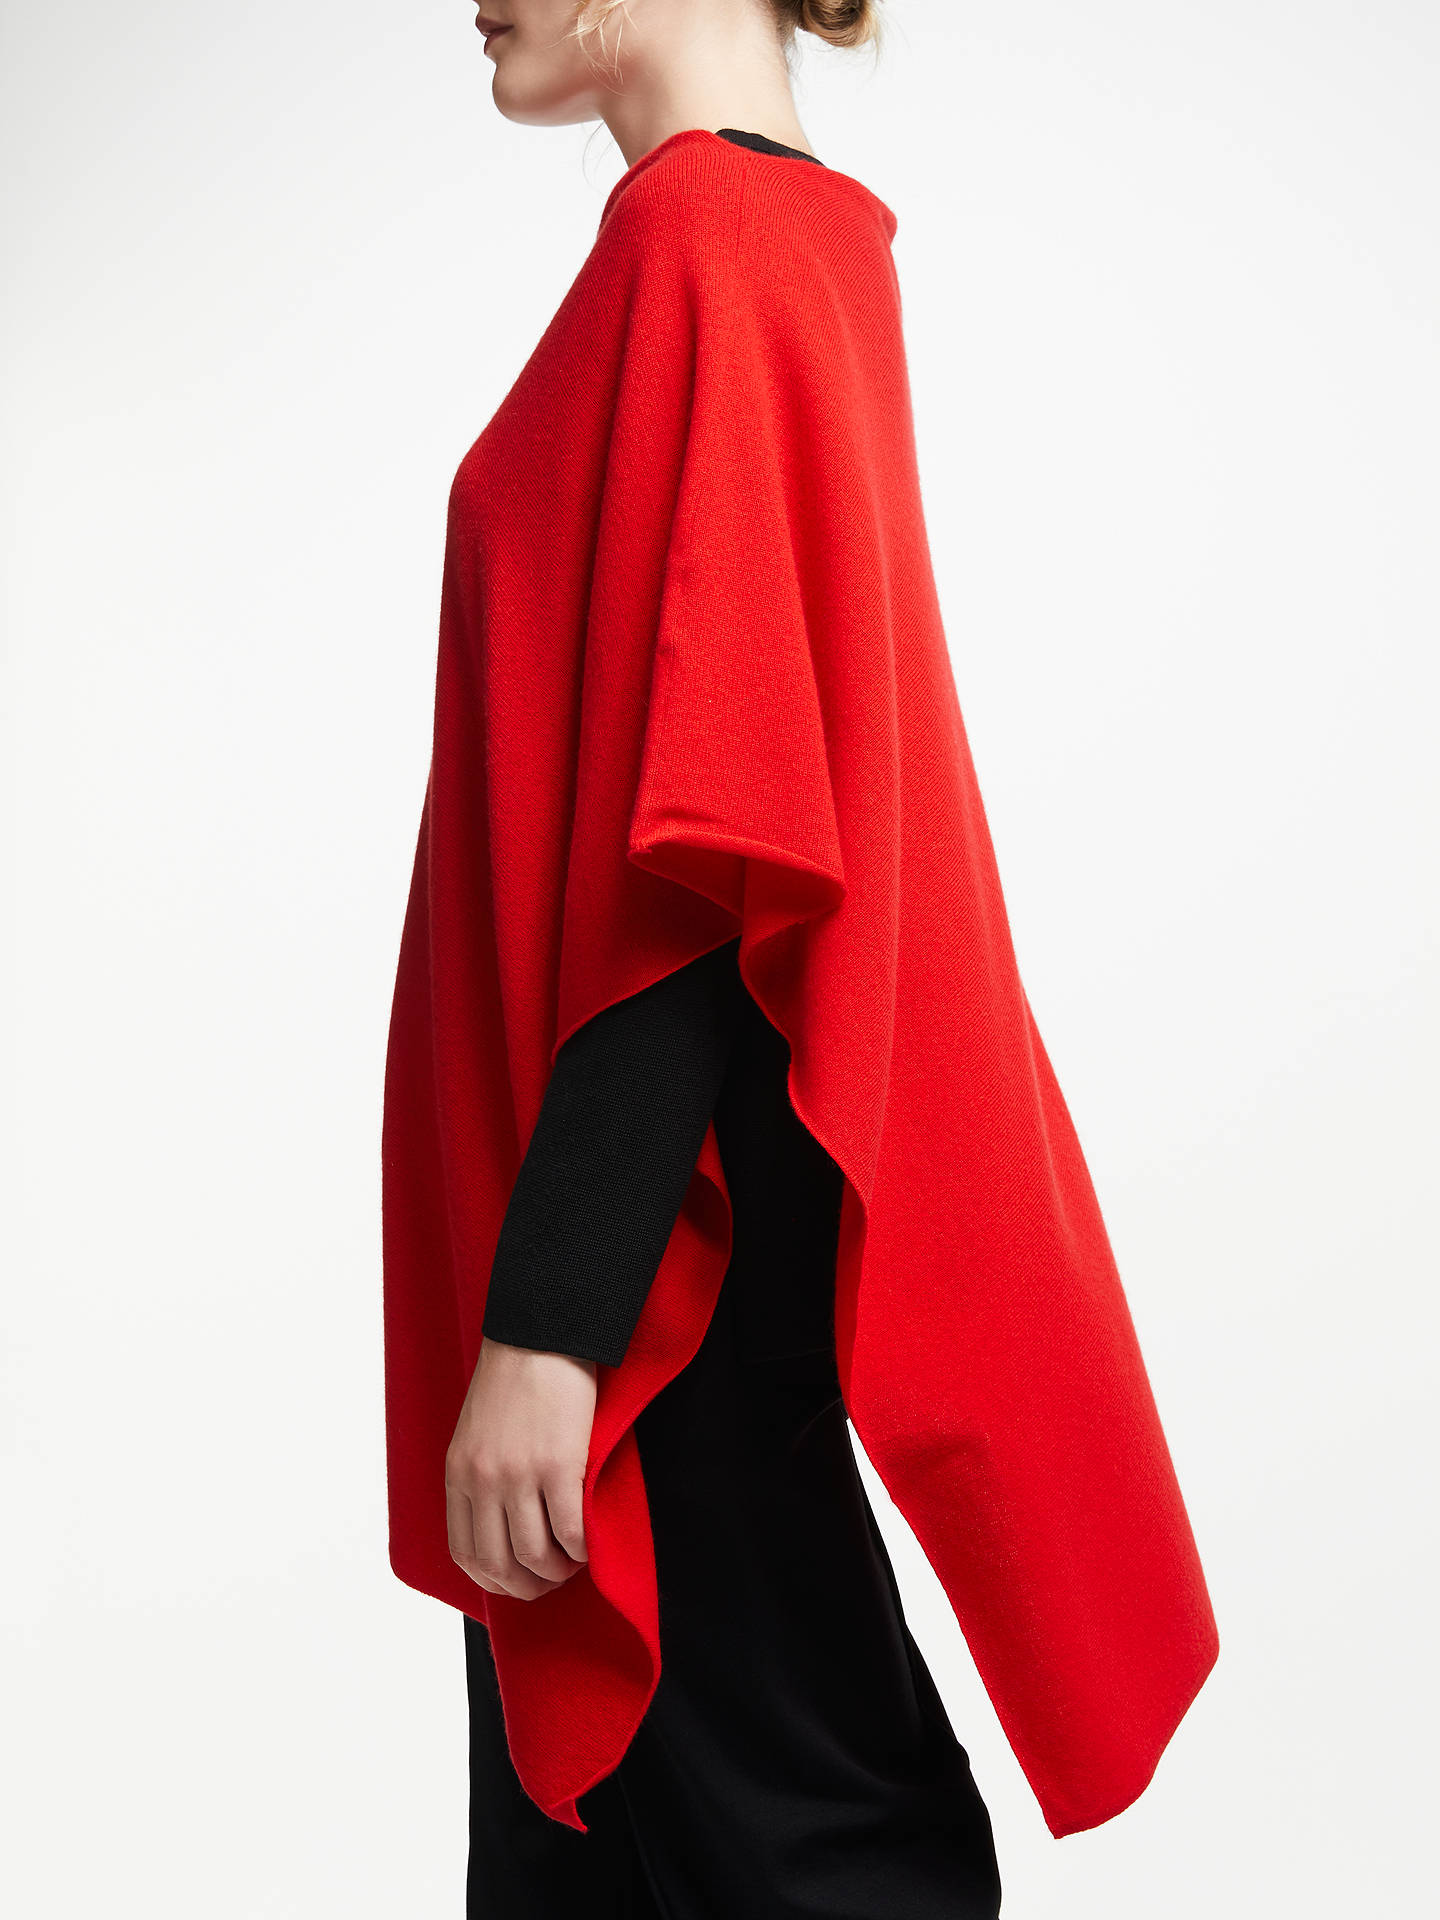 Winser London Cashmere-Blend Poncho, Hollywood Red at John Lewis & Partners